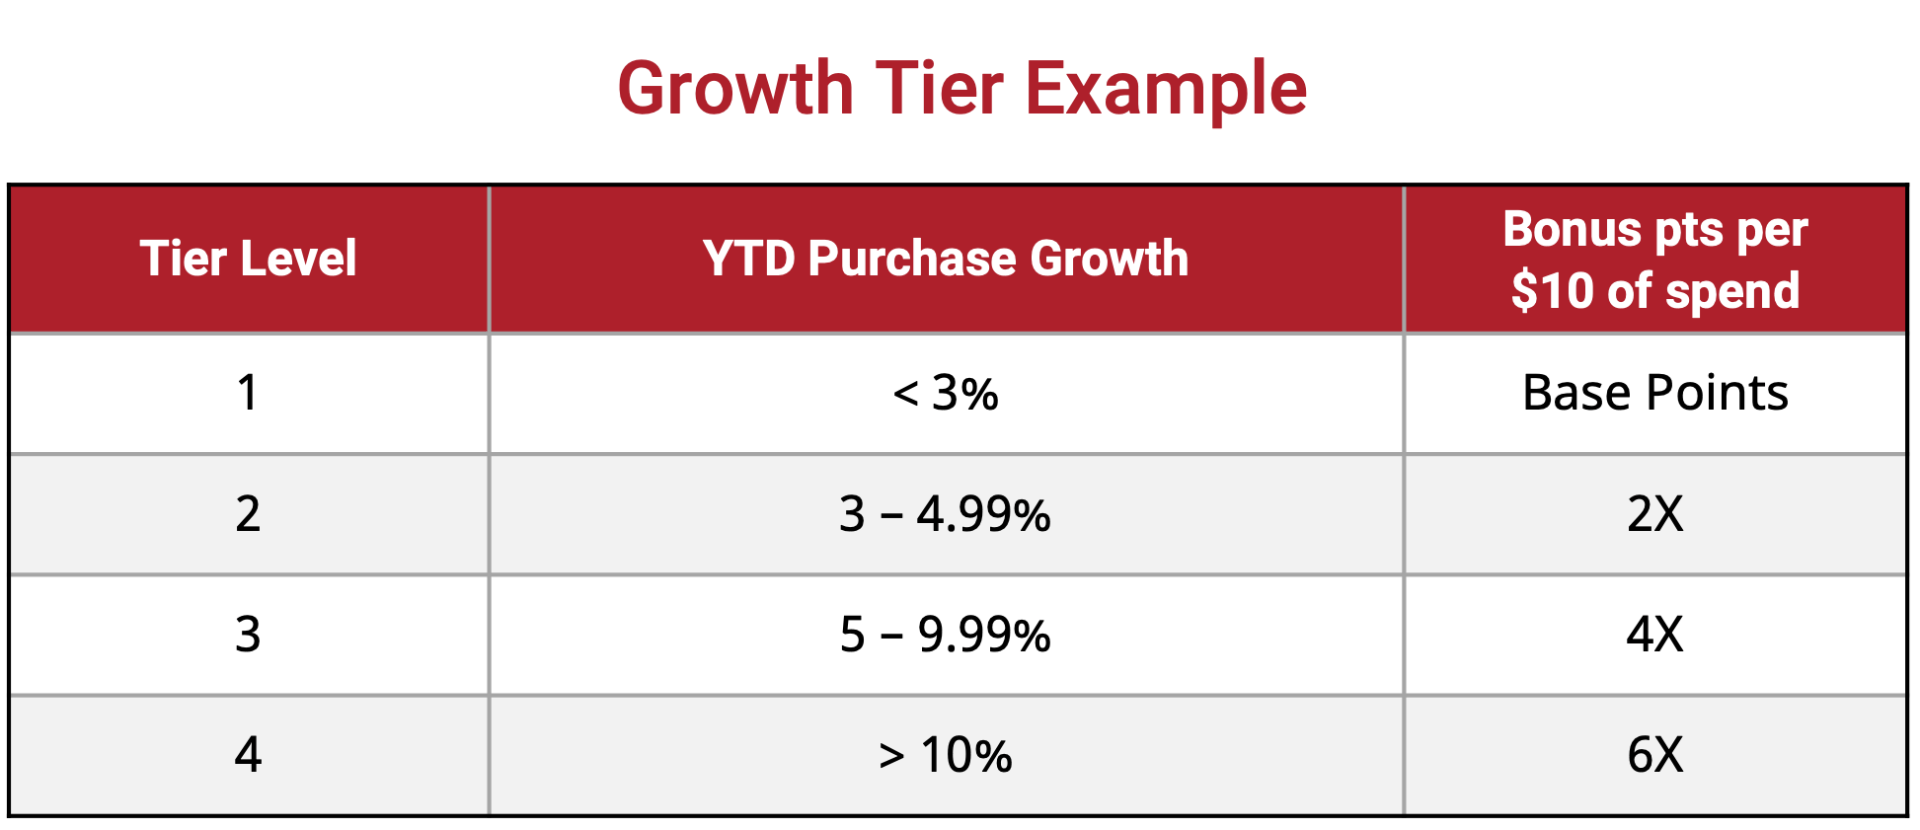 A table showing the growth tier example